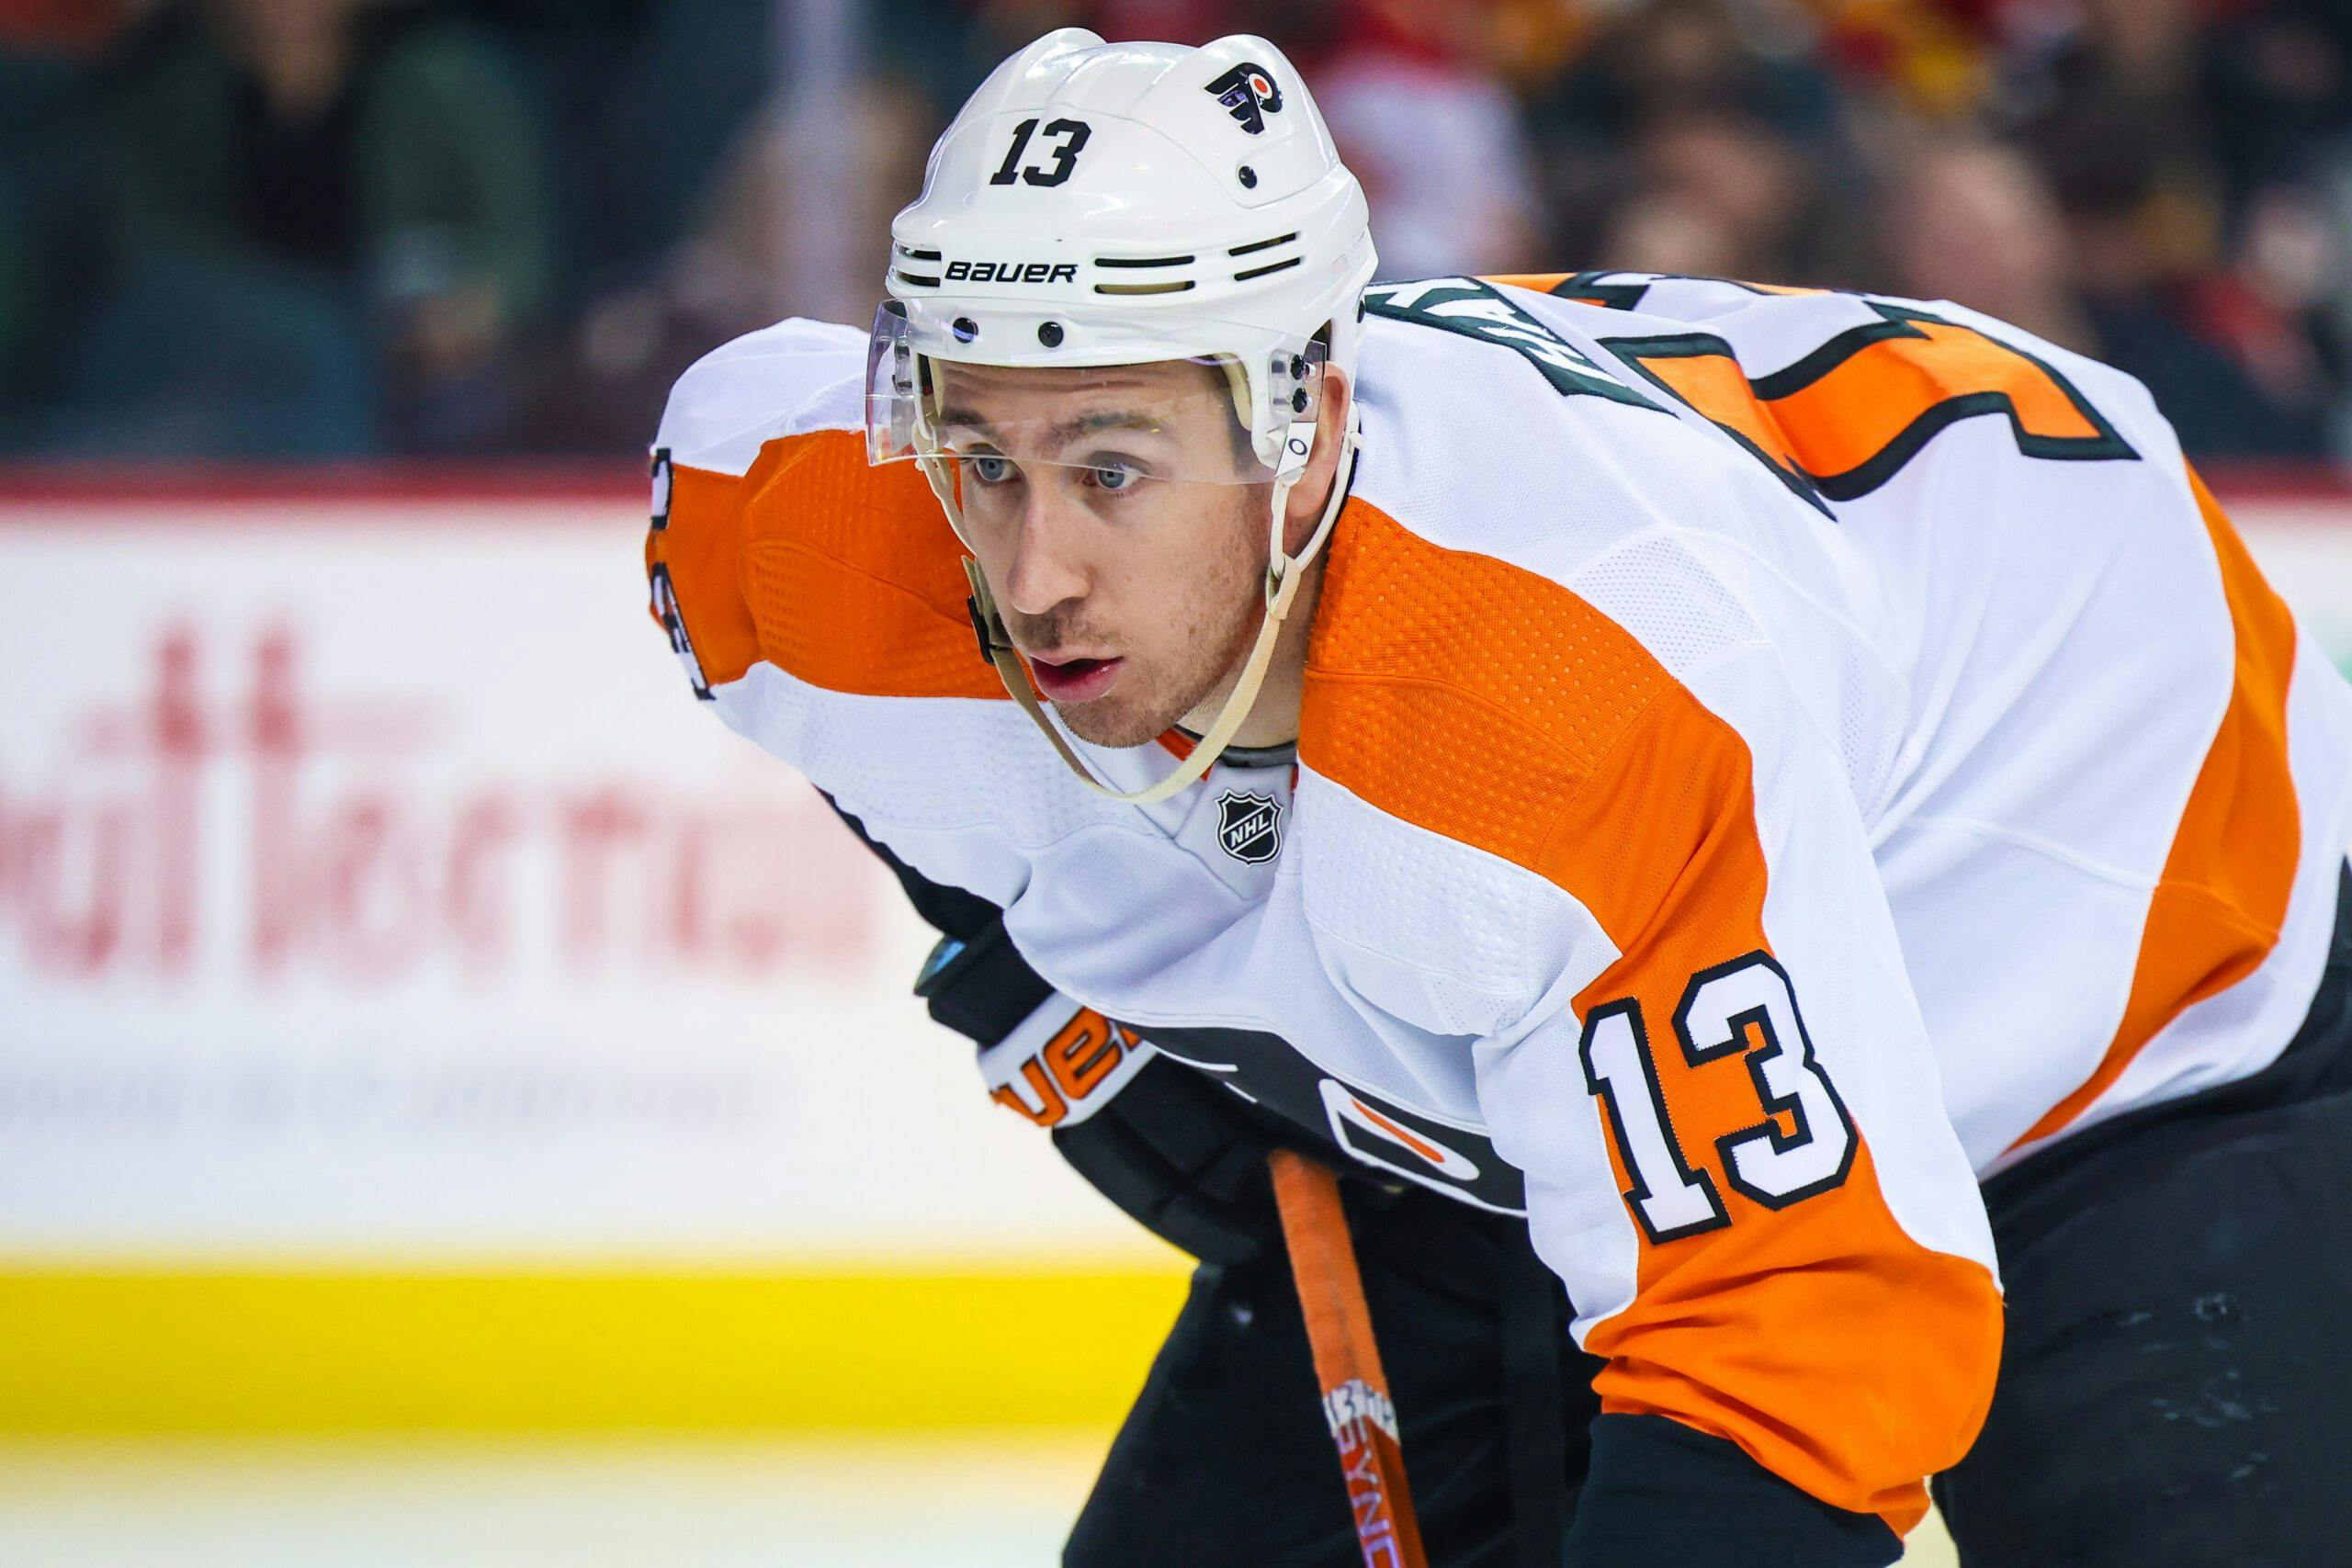 It's a very strong move' - Flyers trade Kevin Hayes to STL in big